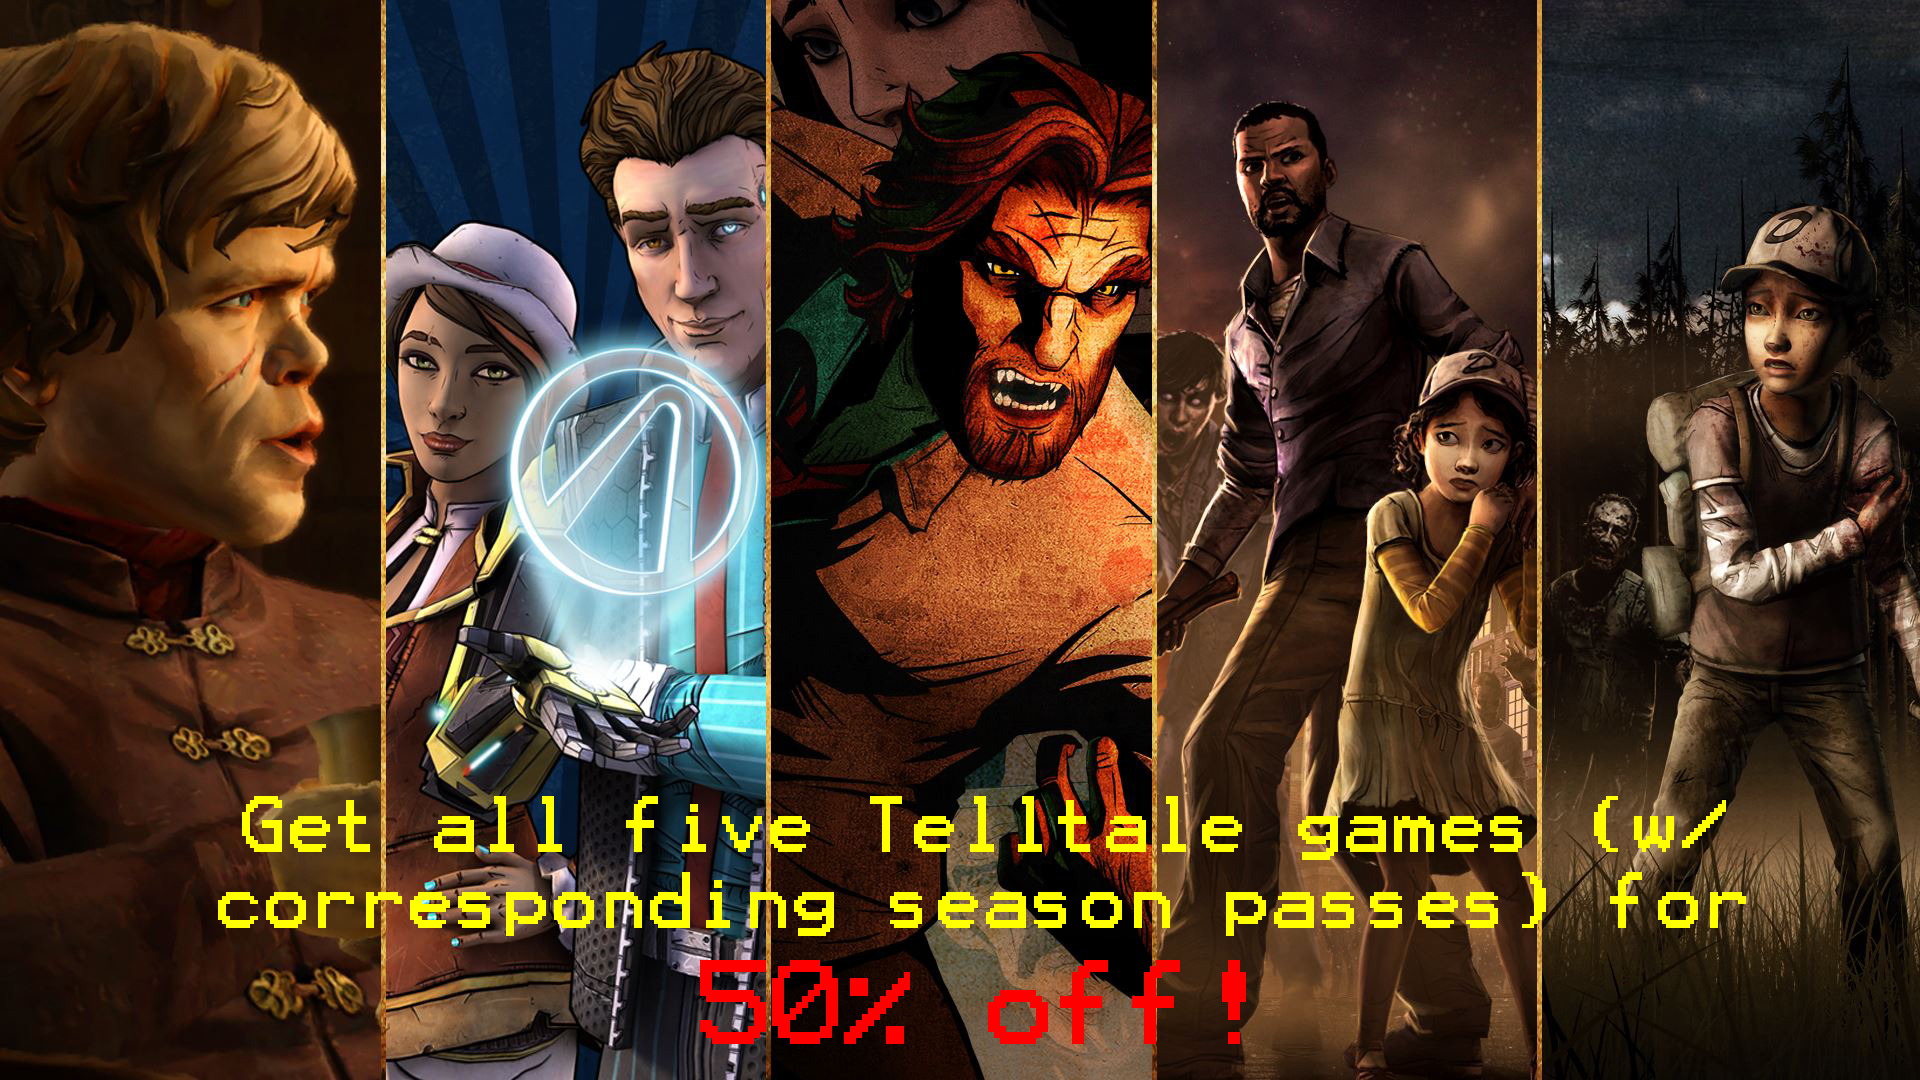 The Telltale Game Collection is currently 50% off